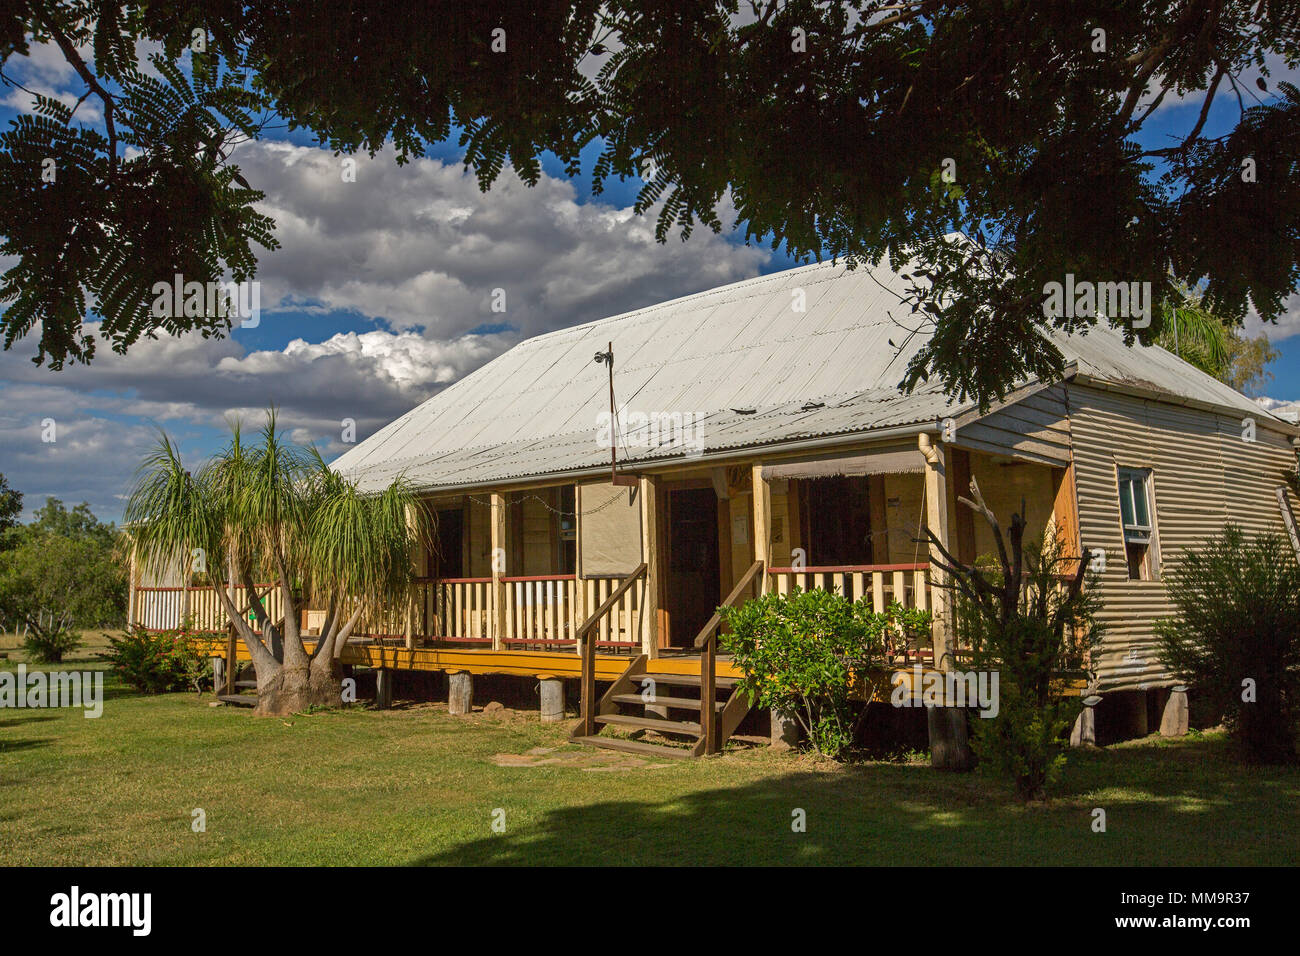 Heritage listed 1860s Bowen River Hotel, classic style timber building among gardens and trees under blue sky in western Queensland Australia Stock Photo